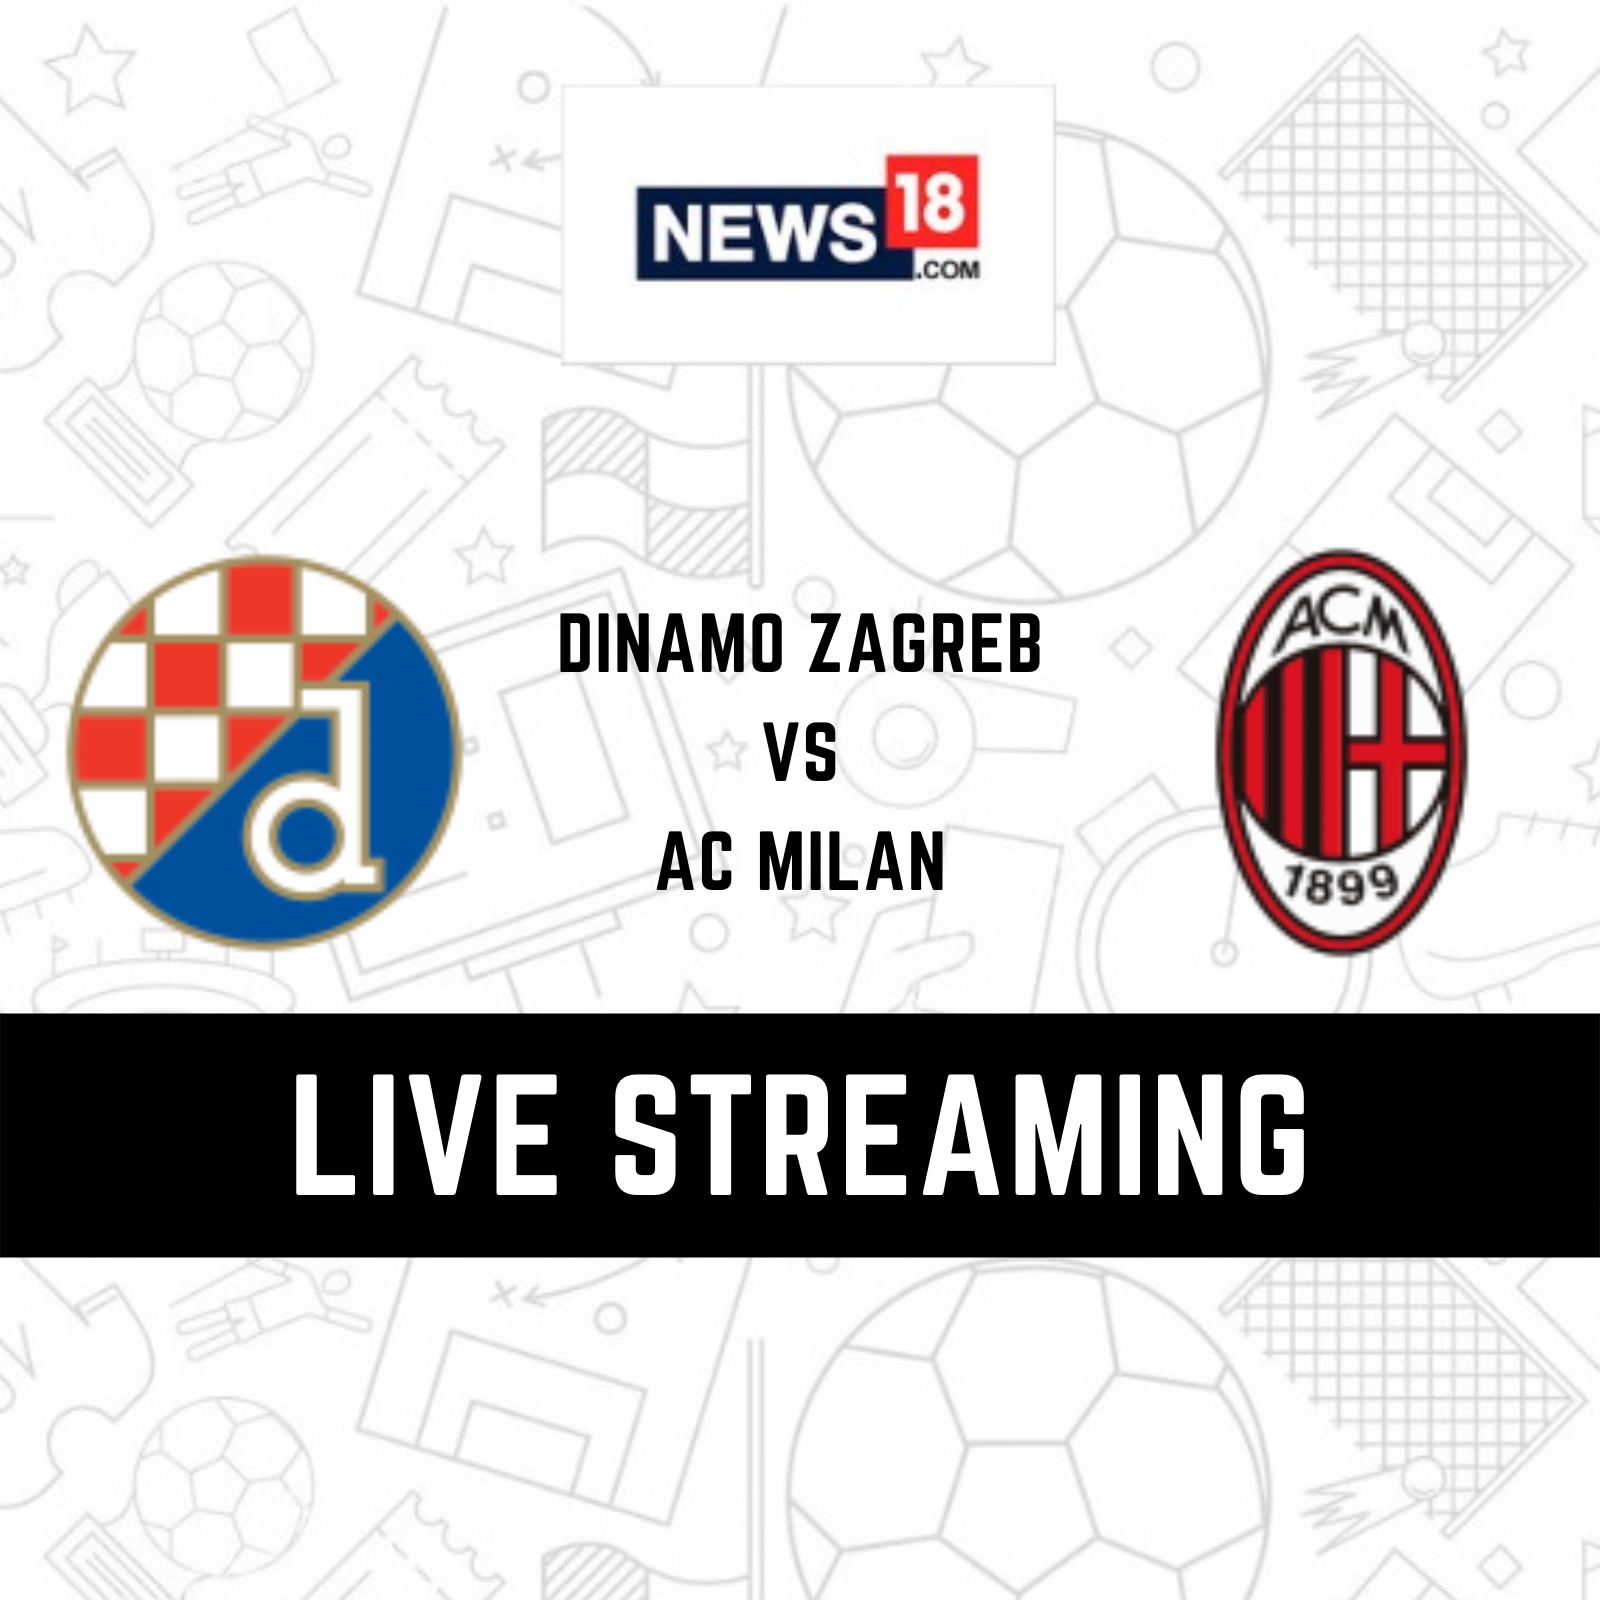 Dinamo Zagreb vs AC Milan Live Streaming When and Where to Watch Champions League Live Coverage on Live TV Online